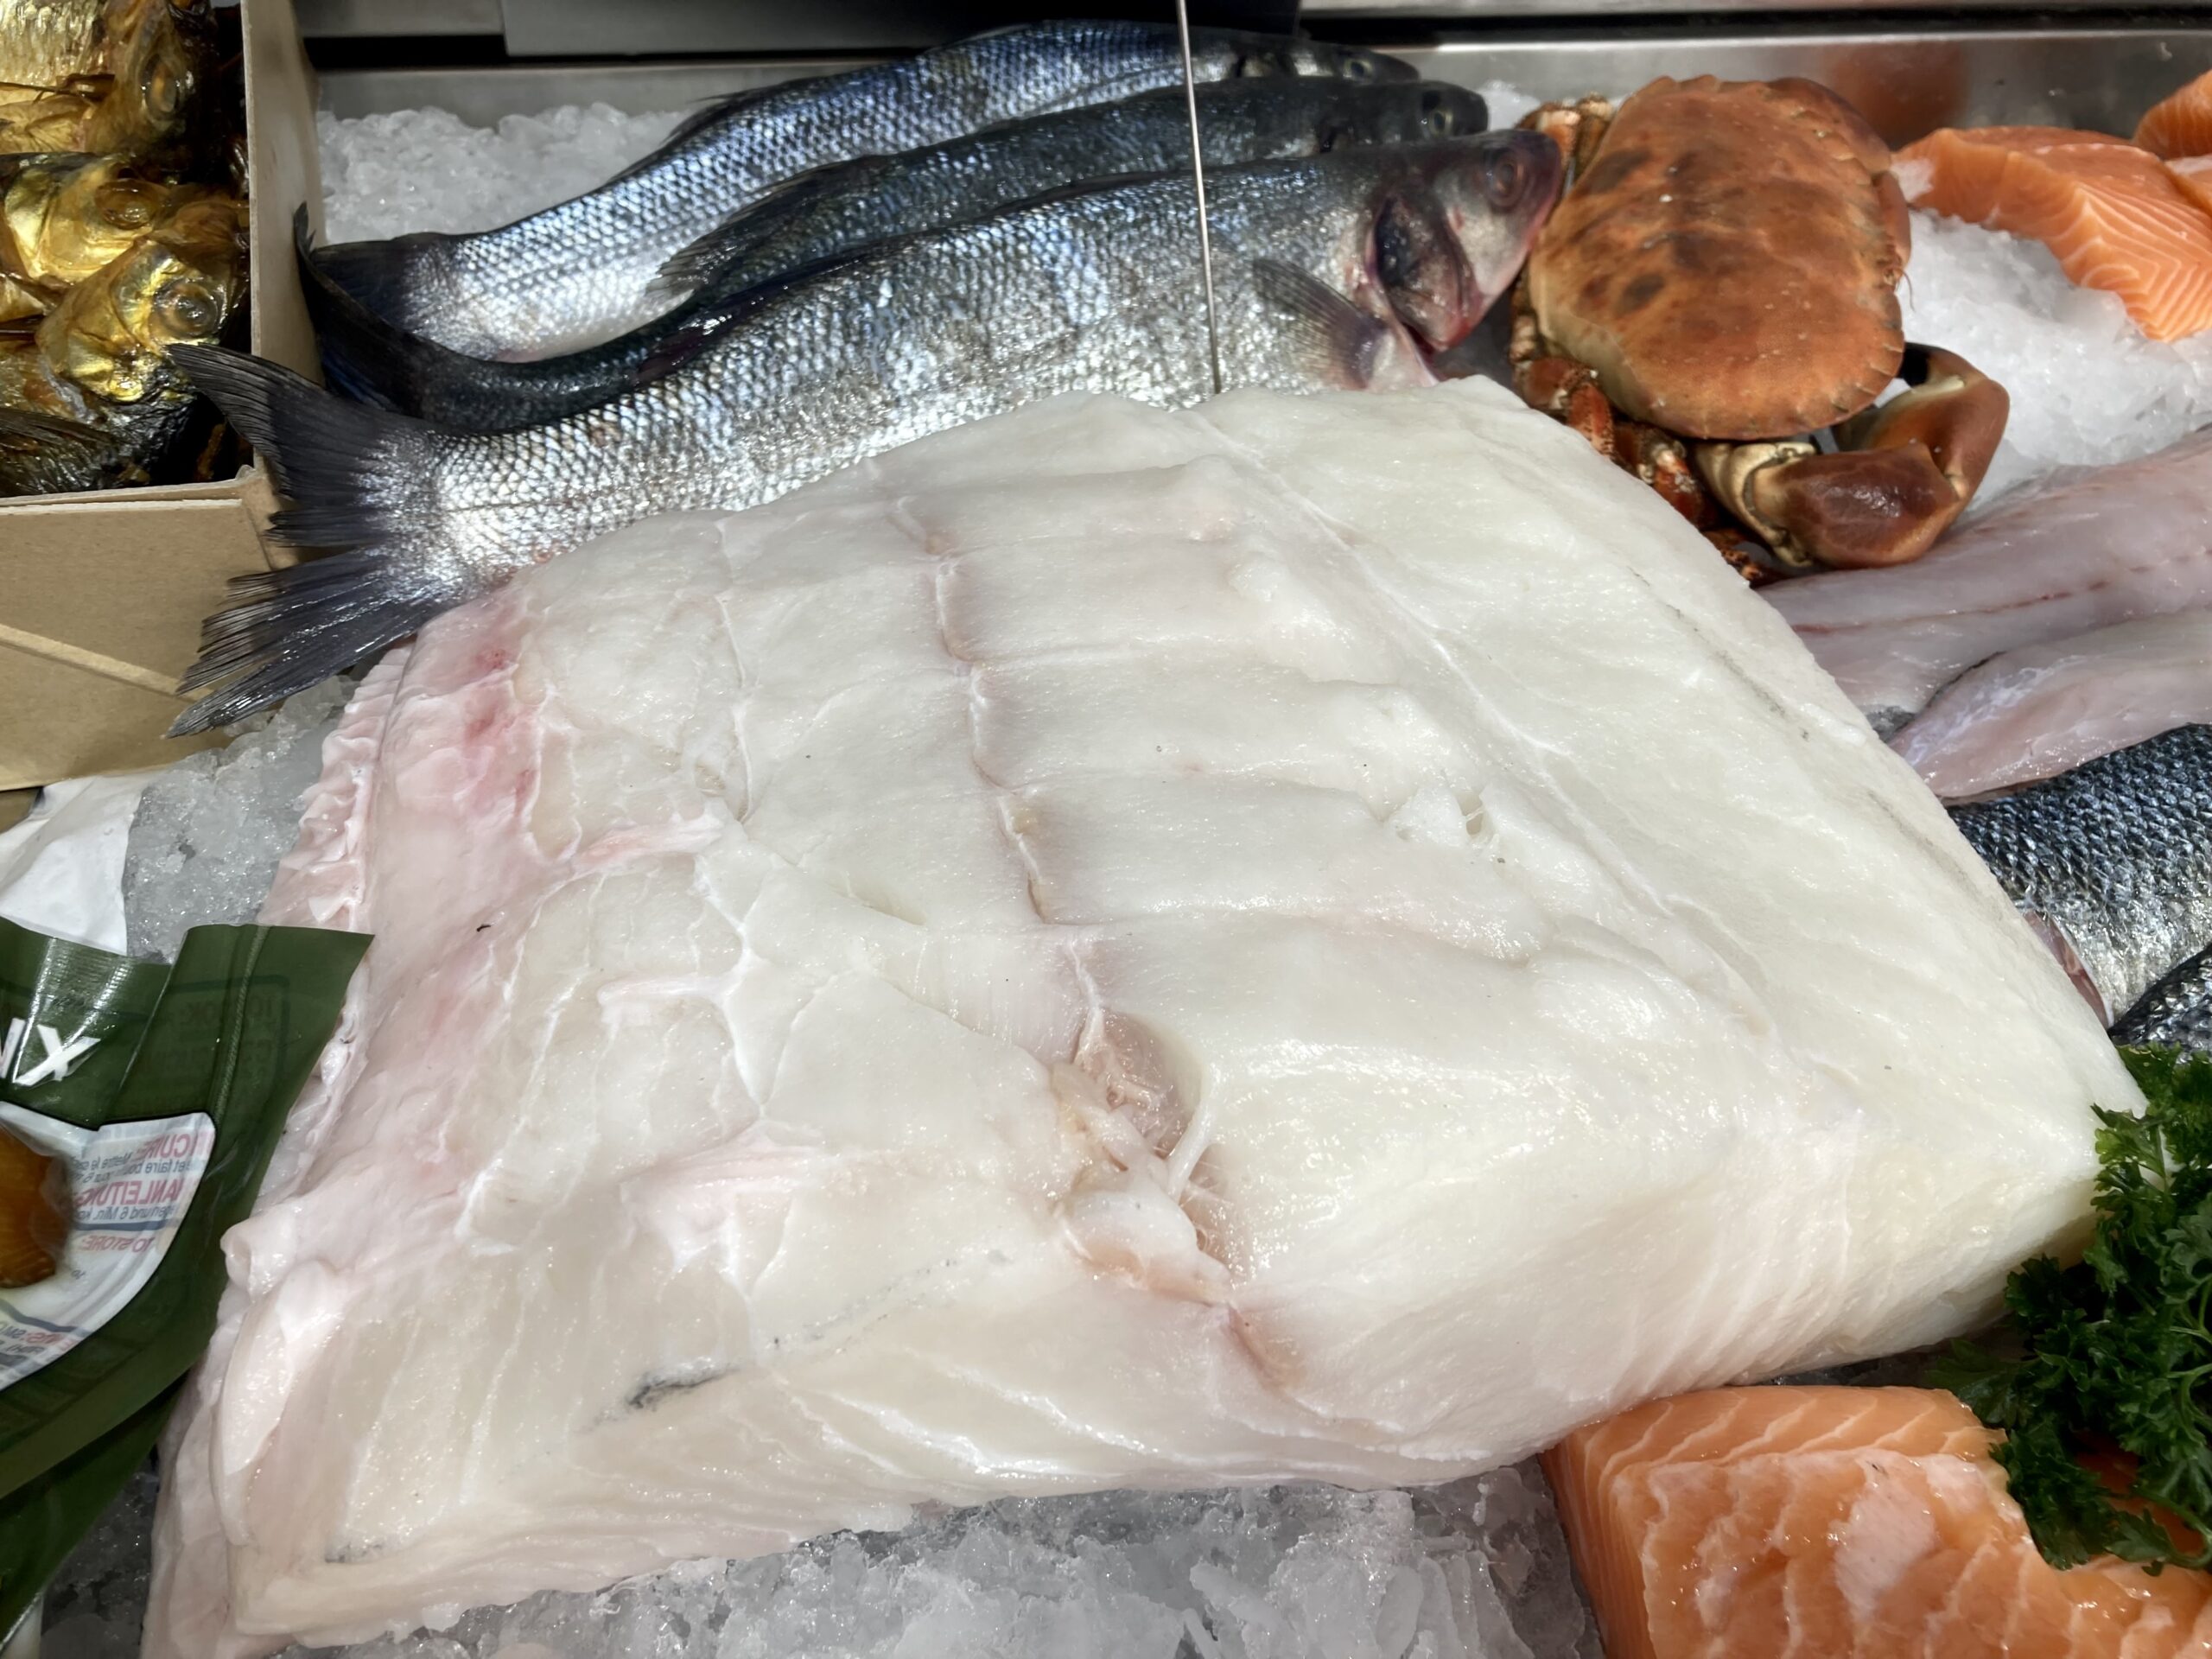 Halibut on sale at Peet's Plaice in Churchtown in Southport